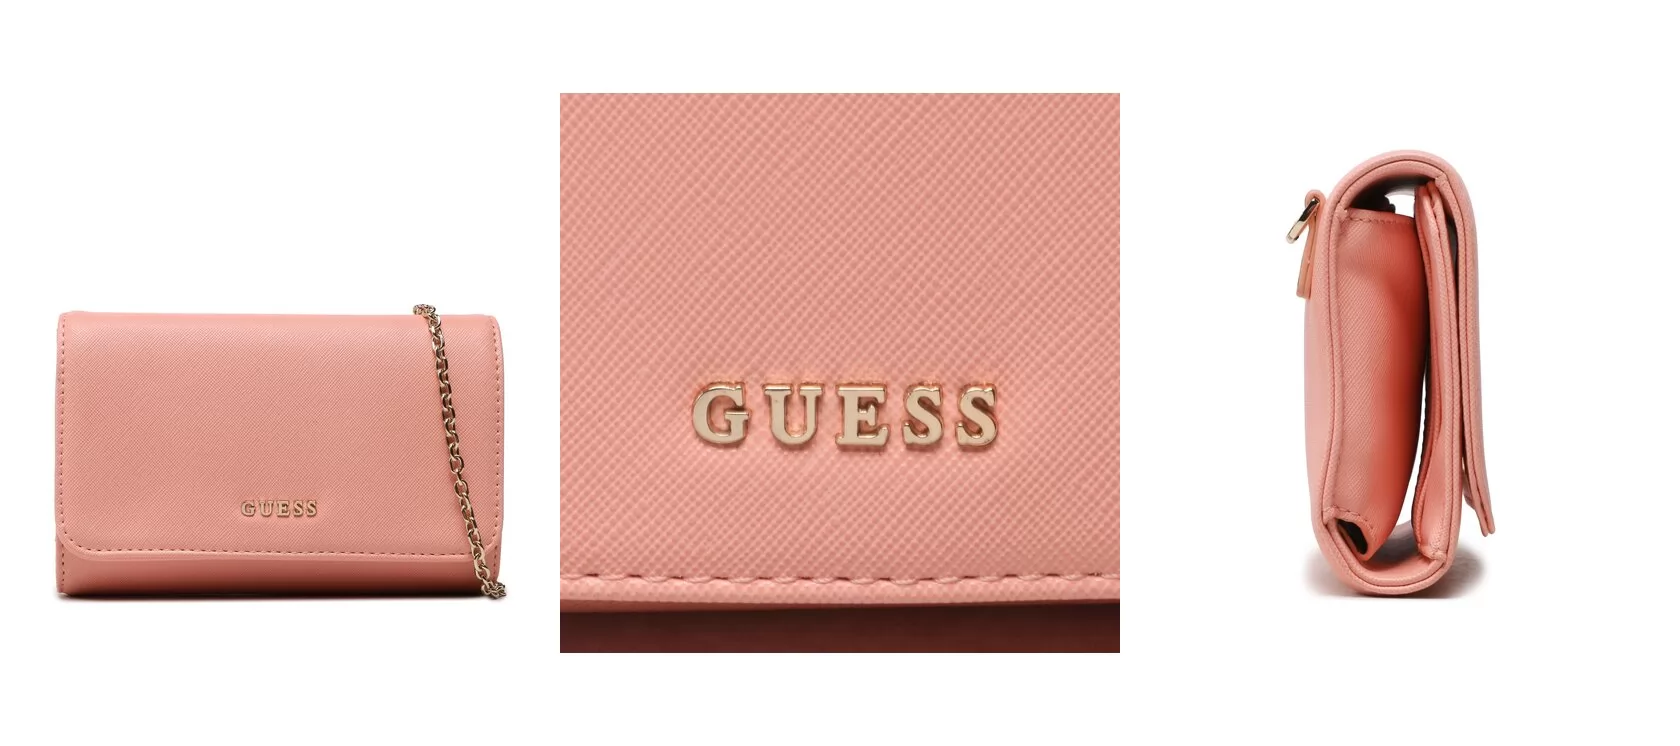 Guess Torebka Not Coordinated Accessories PW1517 P3126 Różowy